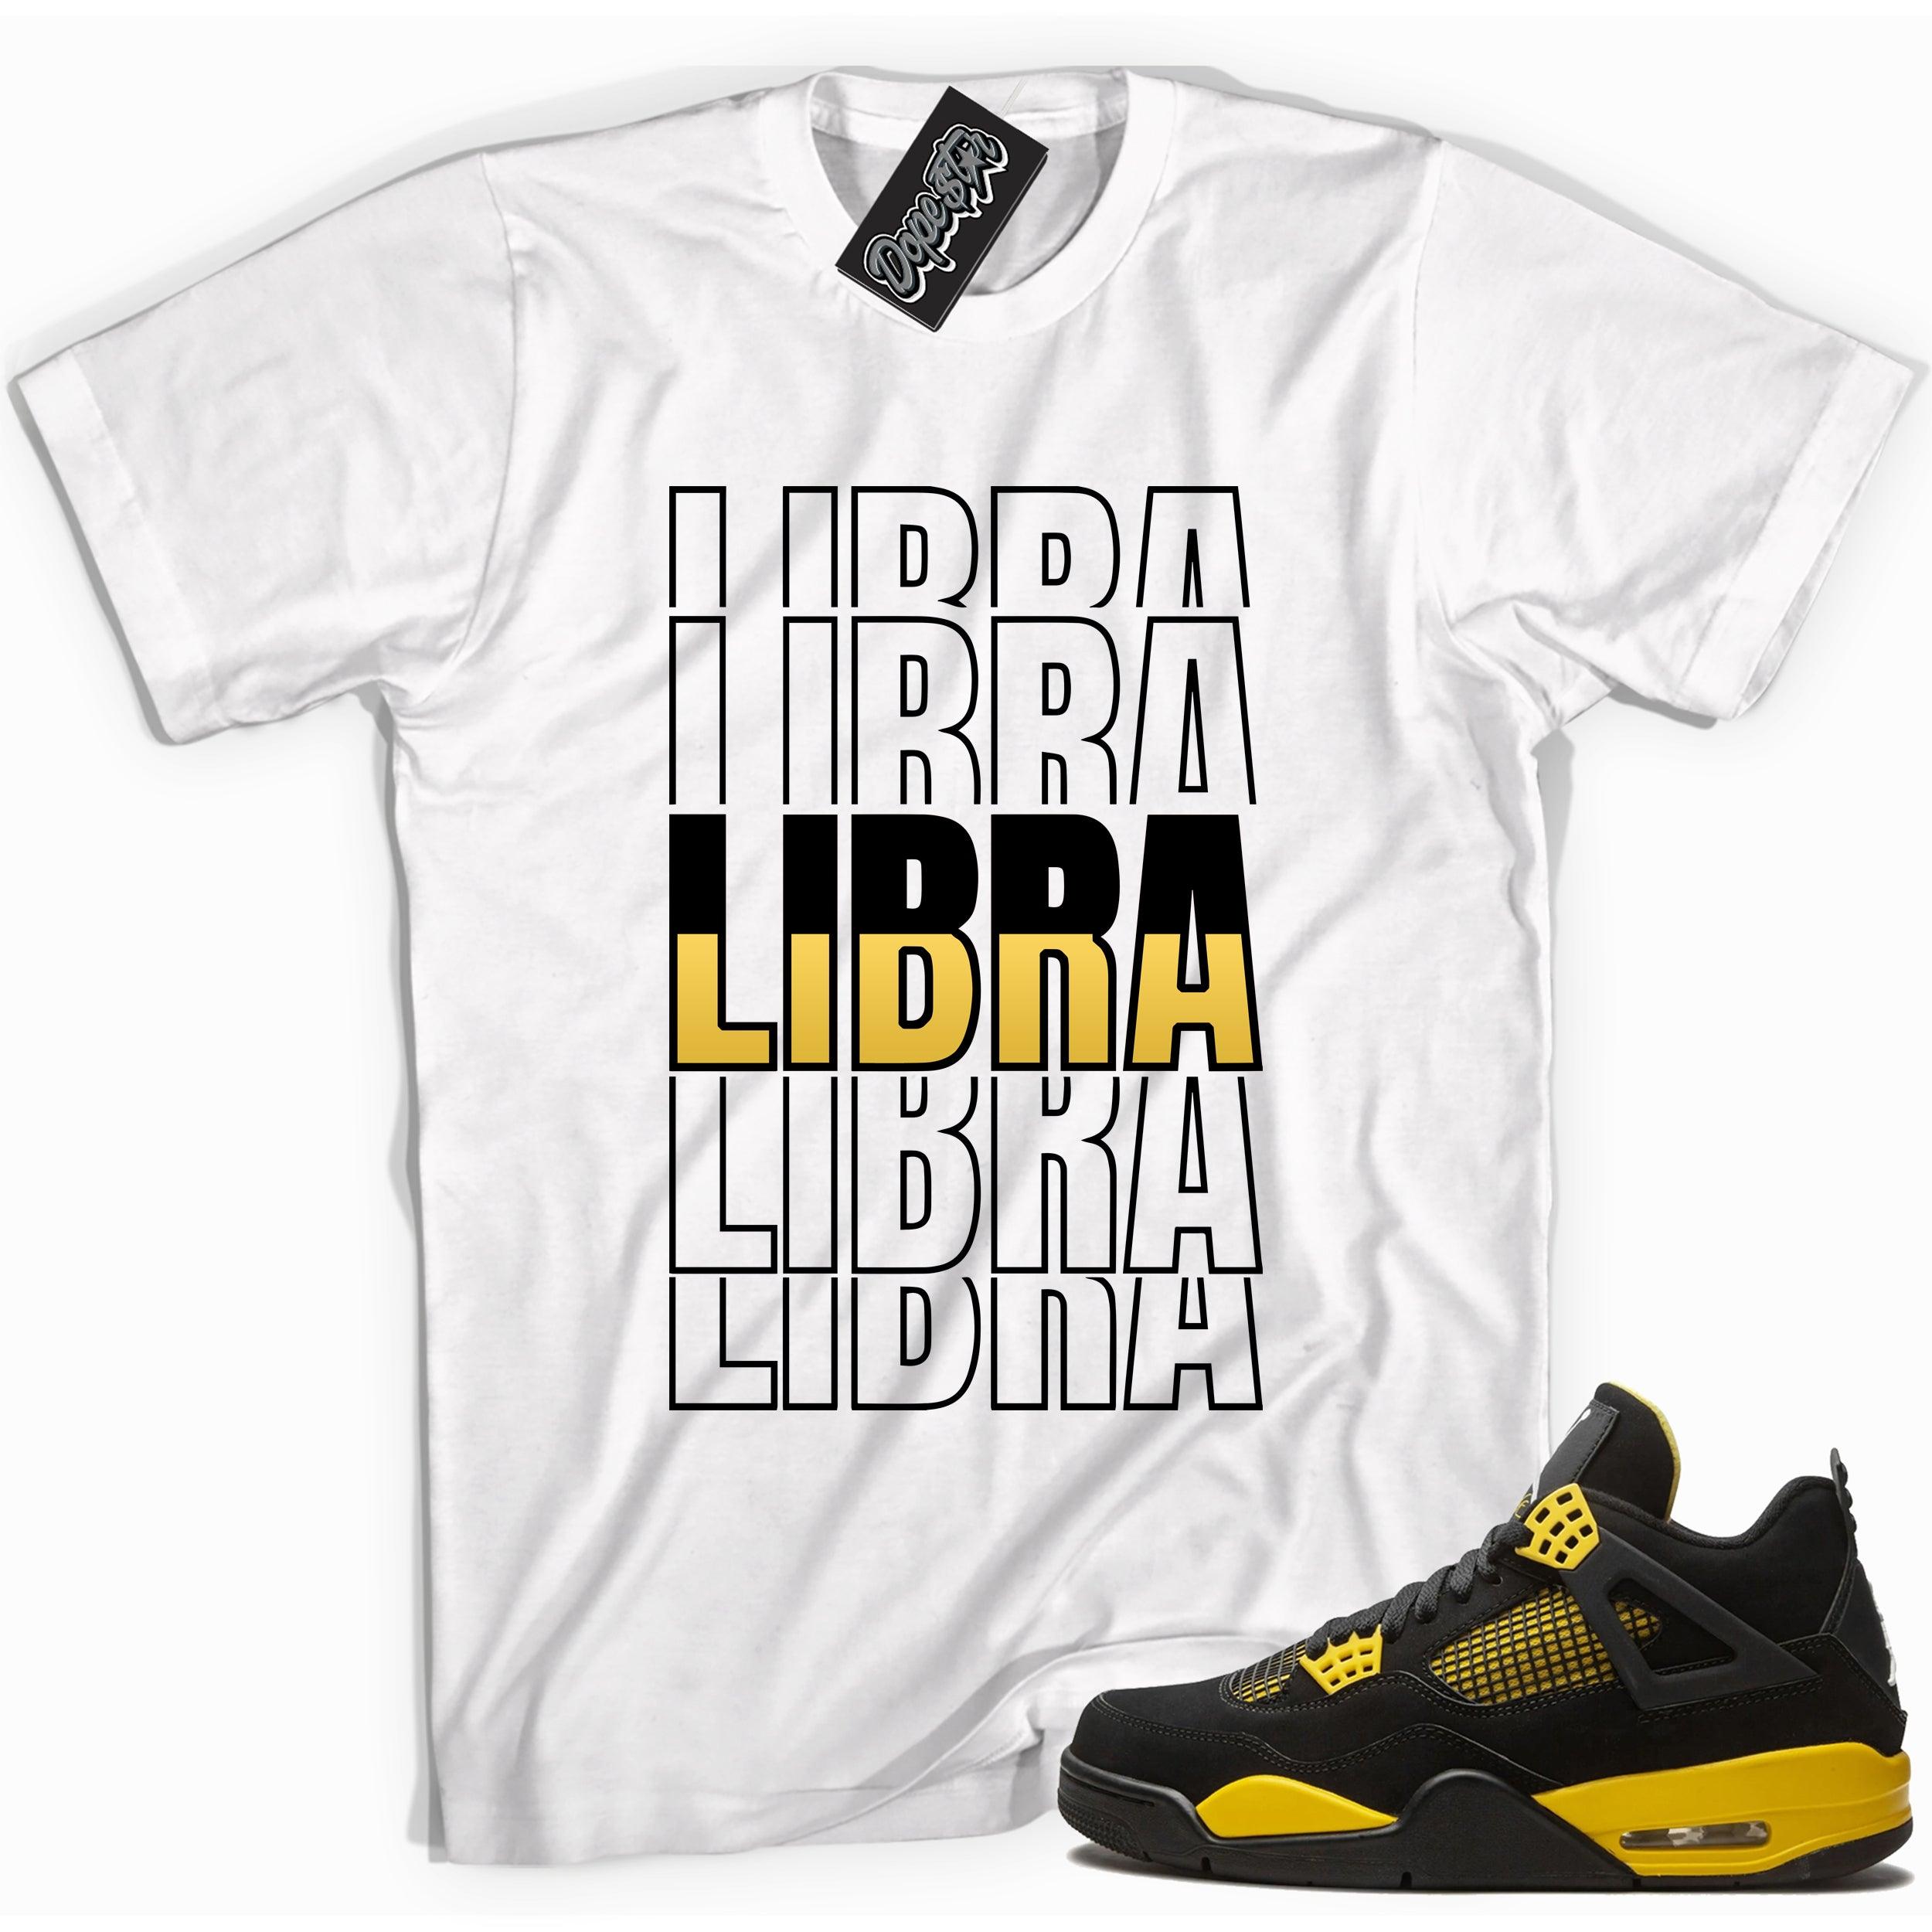 Cool white graphic tee with 'libra' print, that perfectly matches Air Jordan 4 Thunder sneakers